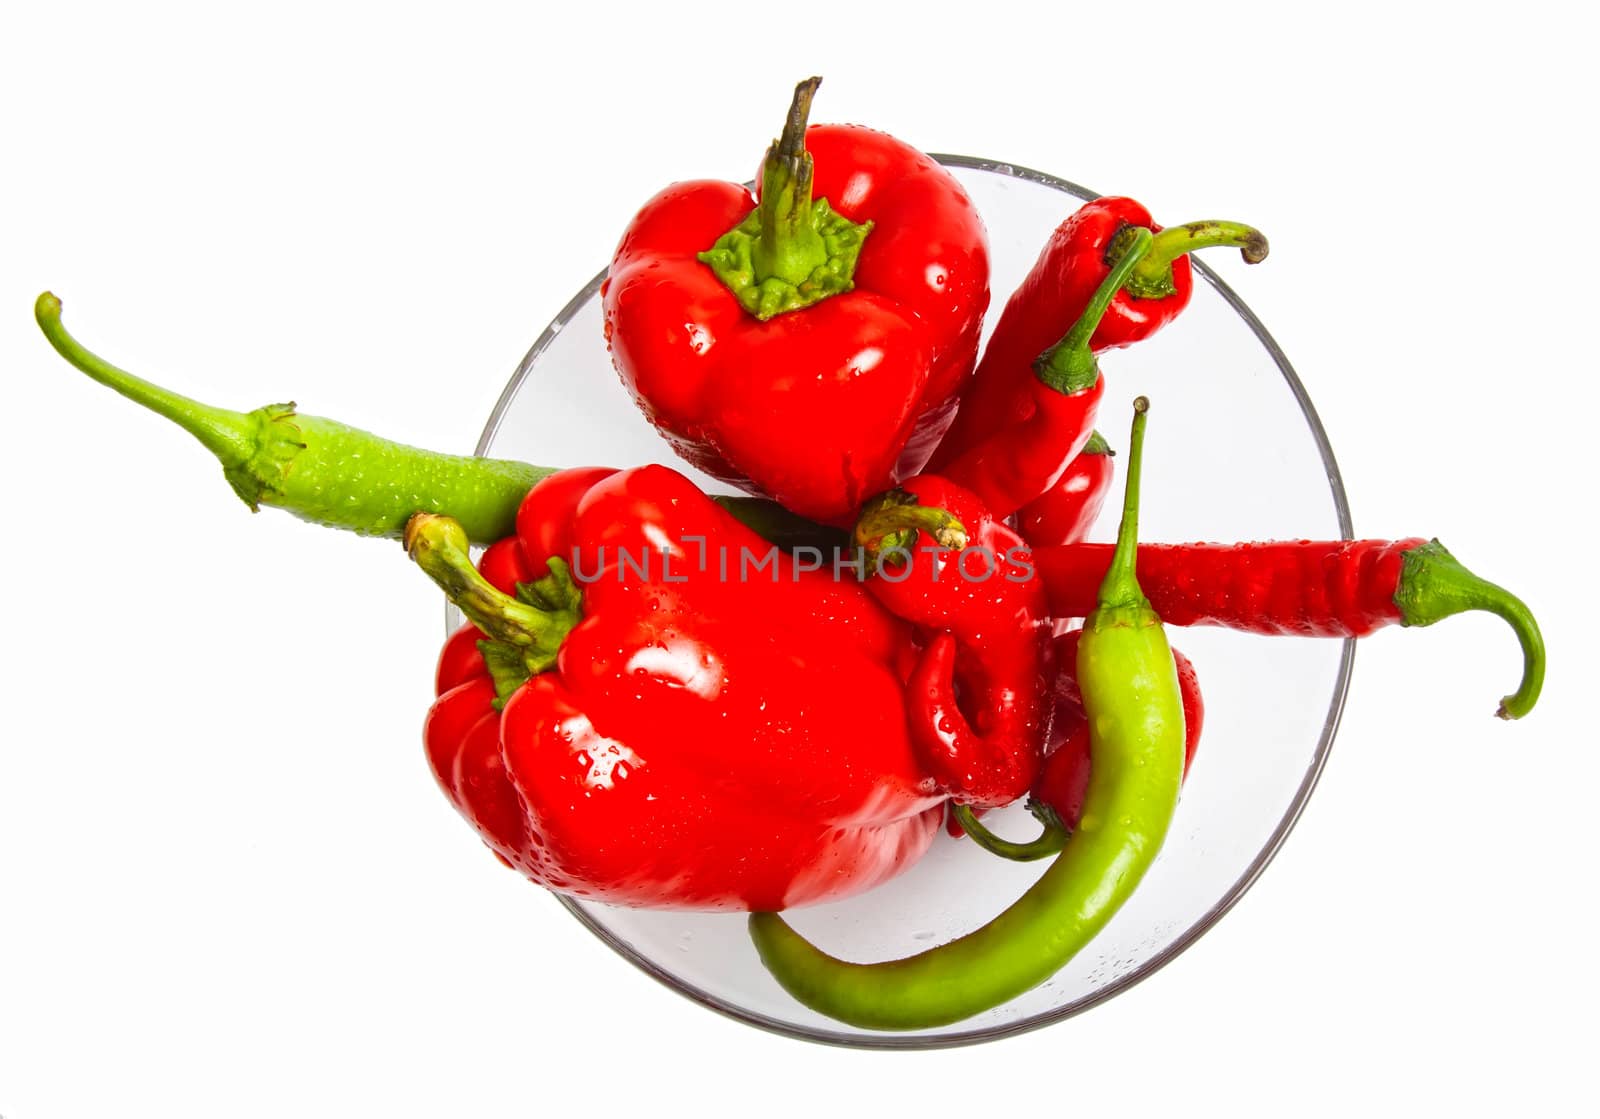 Red and green pepper composition in salad dish by RawGroup